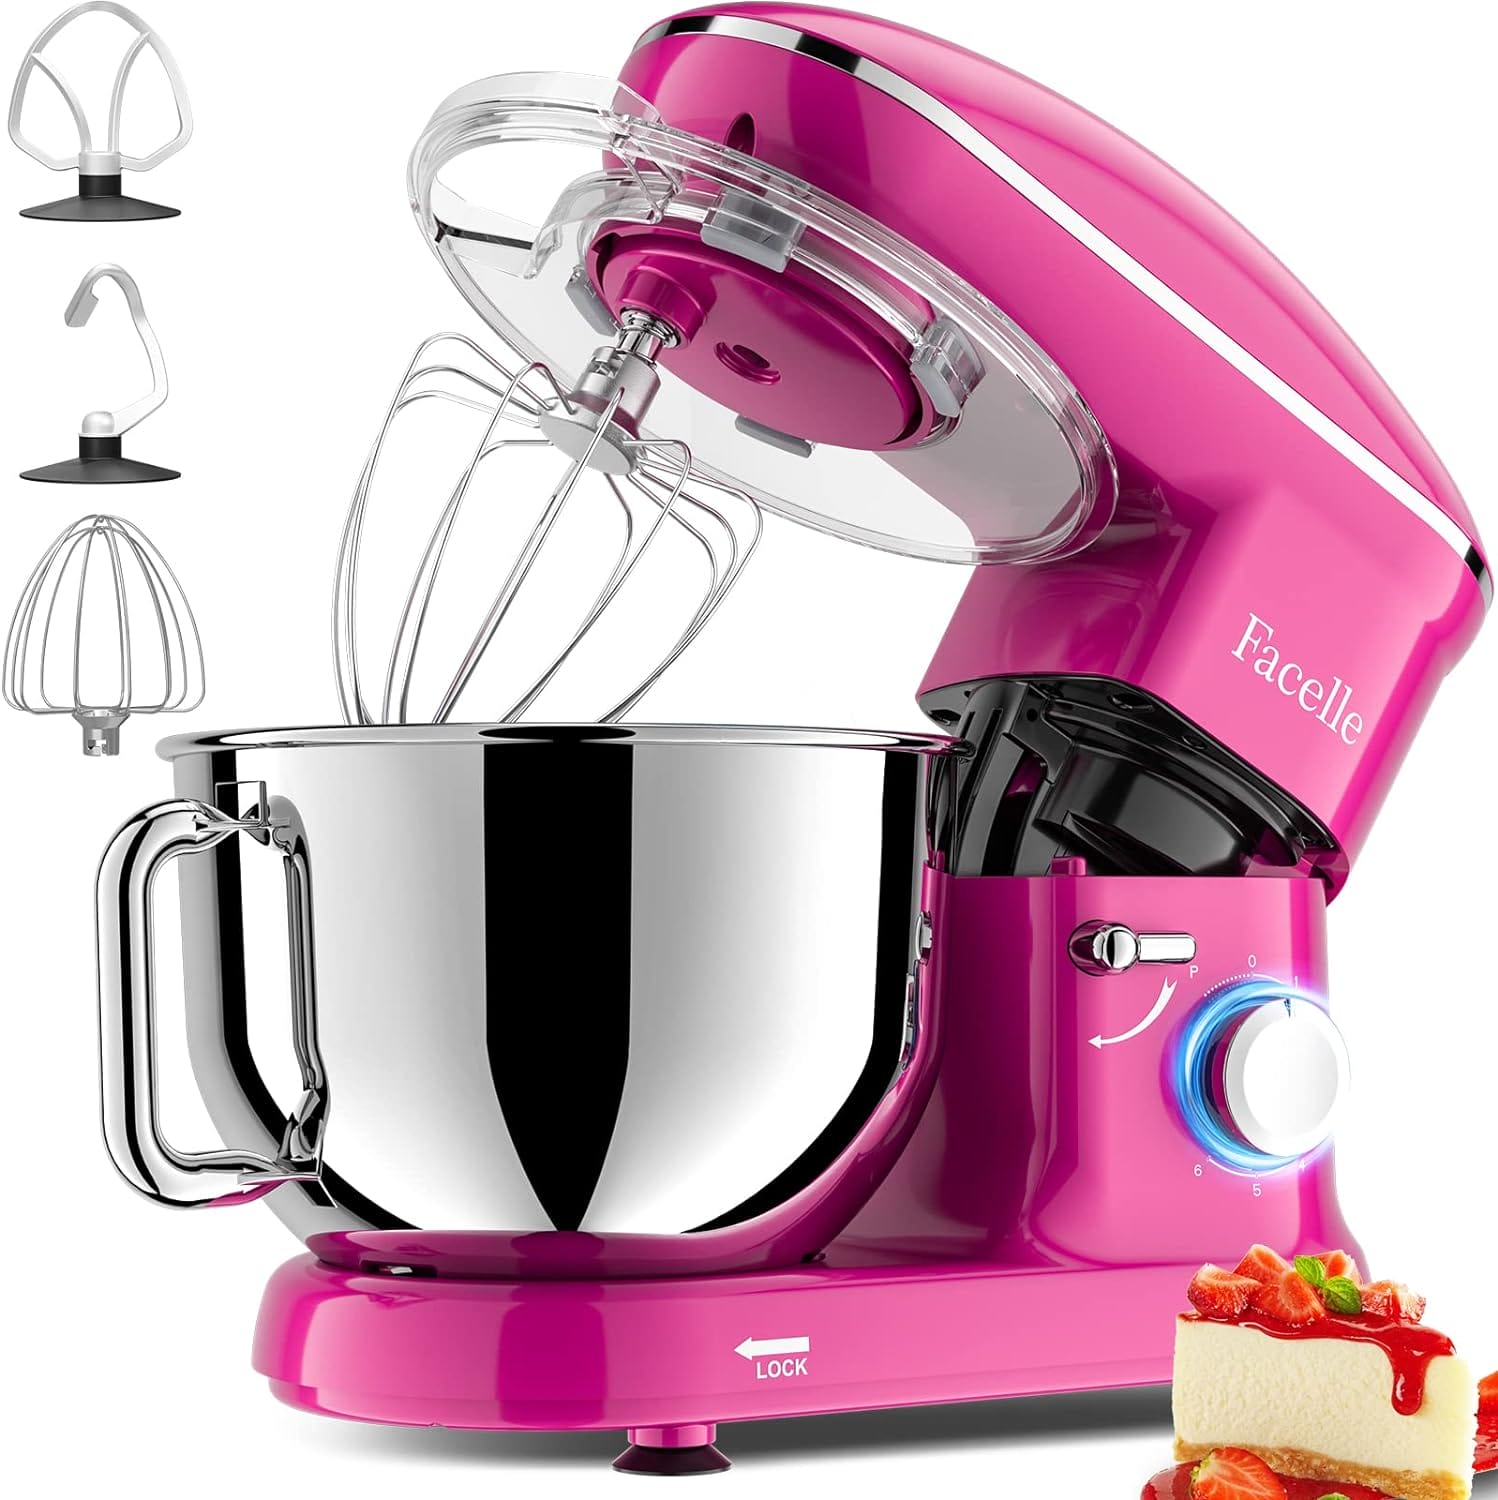 Facelle Stand Mixer, 660W 6 Speed Electric Kitchen Mixer with Pulse Button, Attachments include 6.5 Quart Bowl, Dishwasher Safe Flat Beater, Dough Hook, Wire Whisk  Splash Guard, for Dough, Baking,Cakes,Cookie, Purple